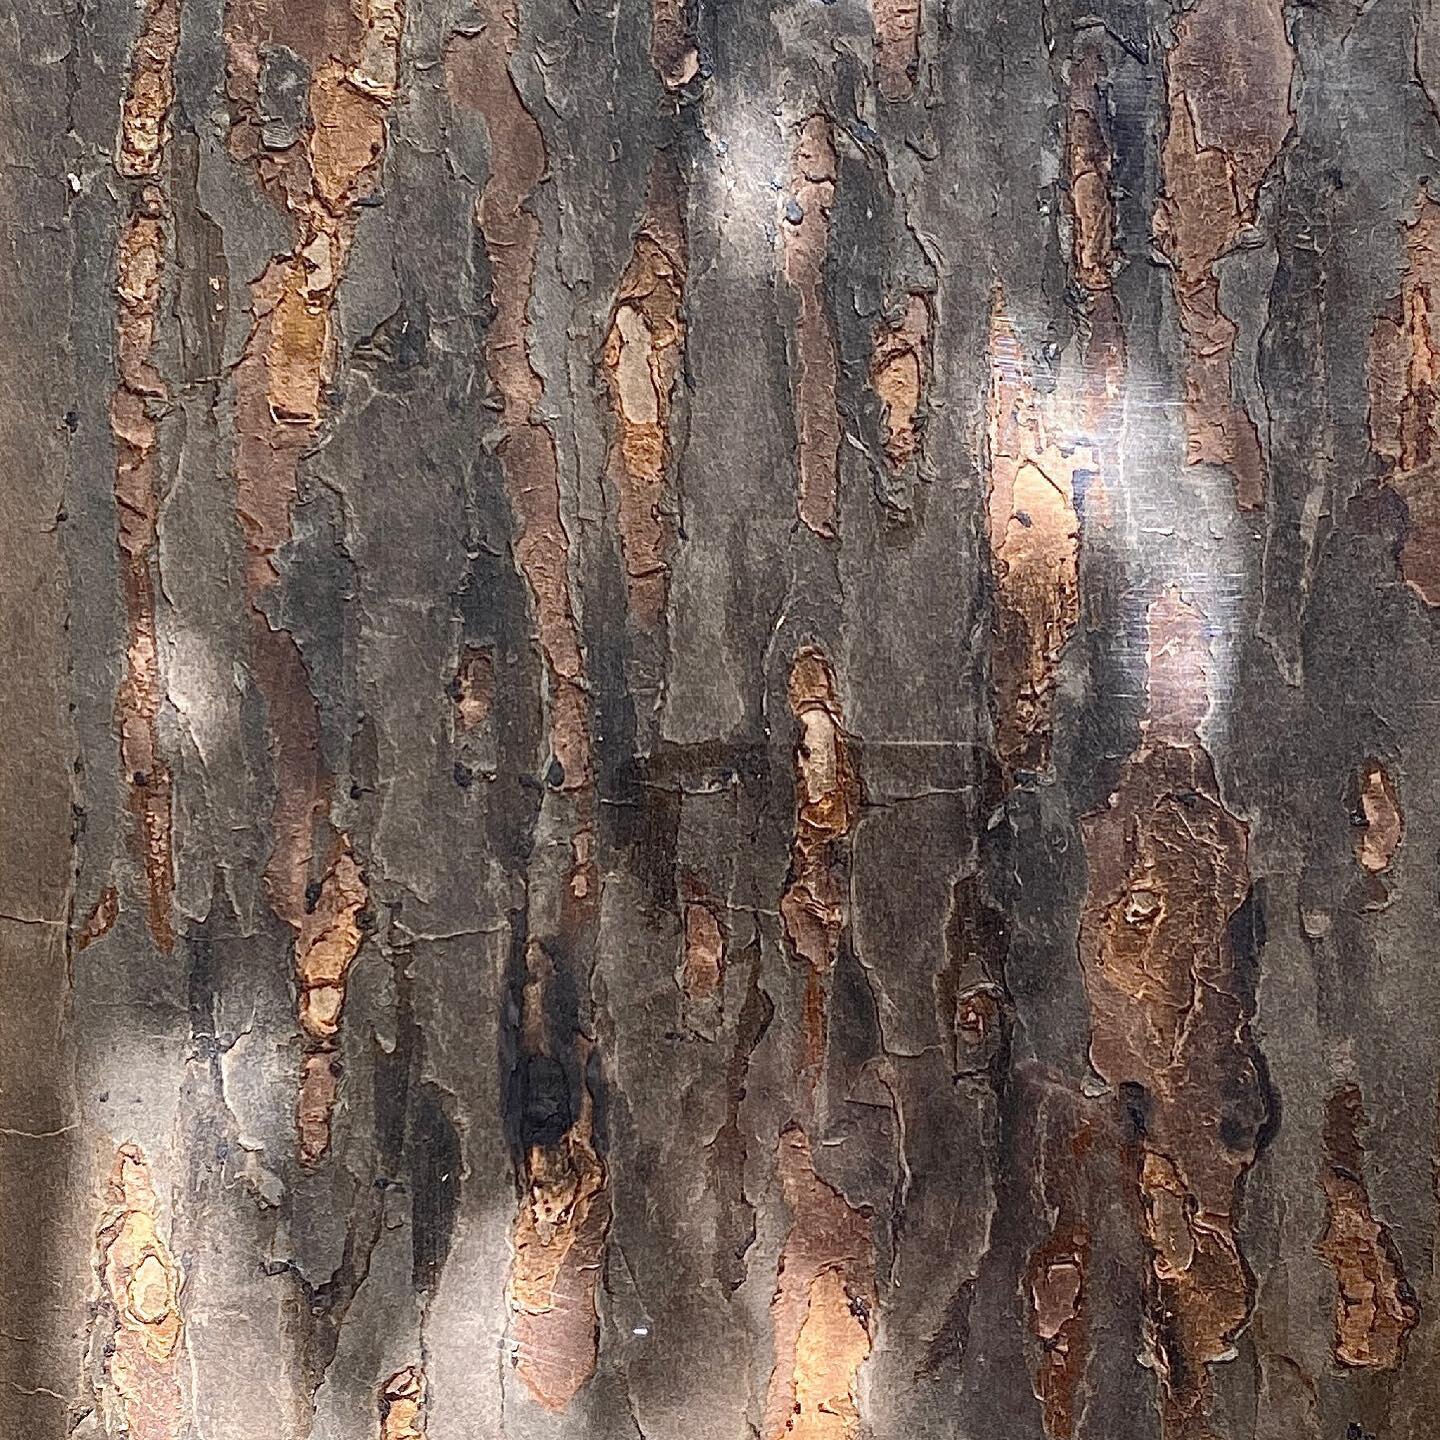 STUDY OF BARK. Collage. Photographed in dappled light. Continuing fascination with texture. Inevitable subject living in The National Forest. SOLD. #collage #bark #tree #texture #paper #contemporaryart #study #nature #englishart #nationalforest #the 